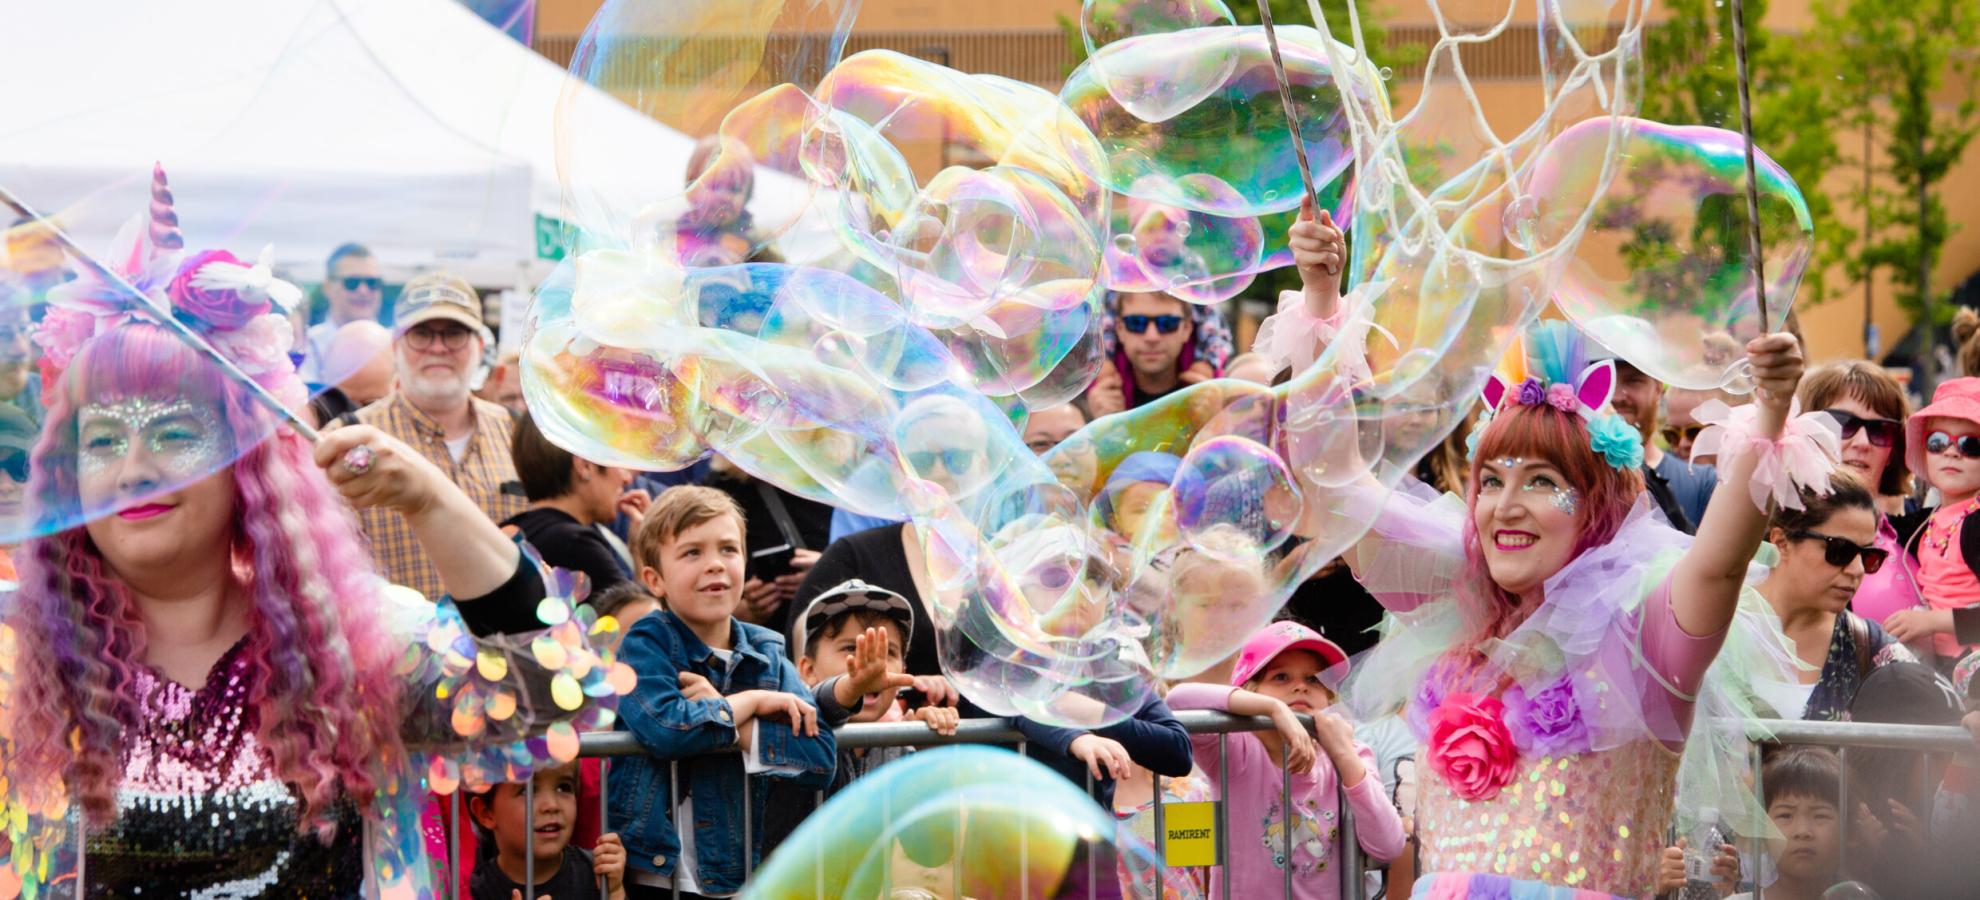 A crowd of people watching performers making giant soap bubble